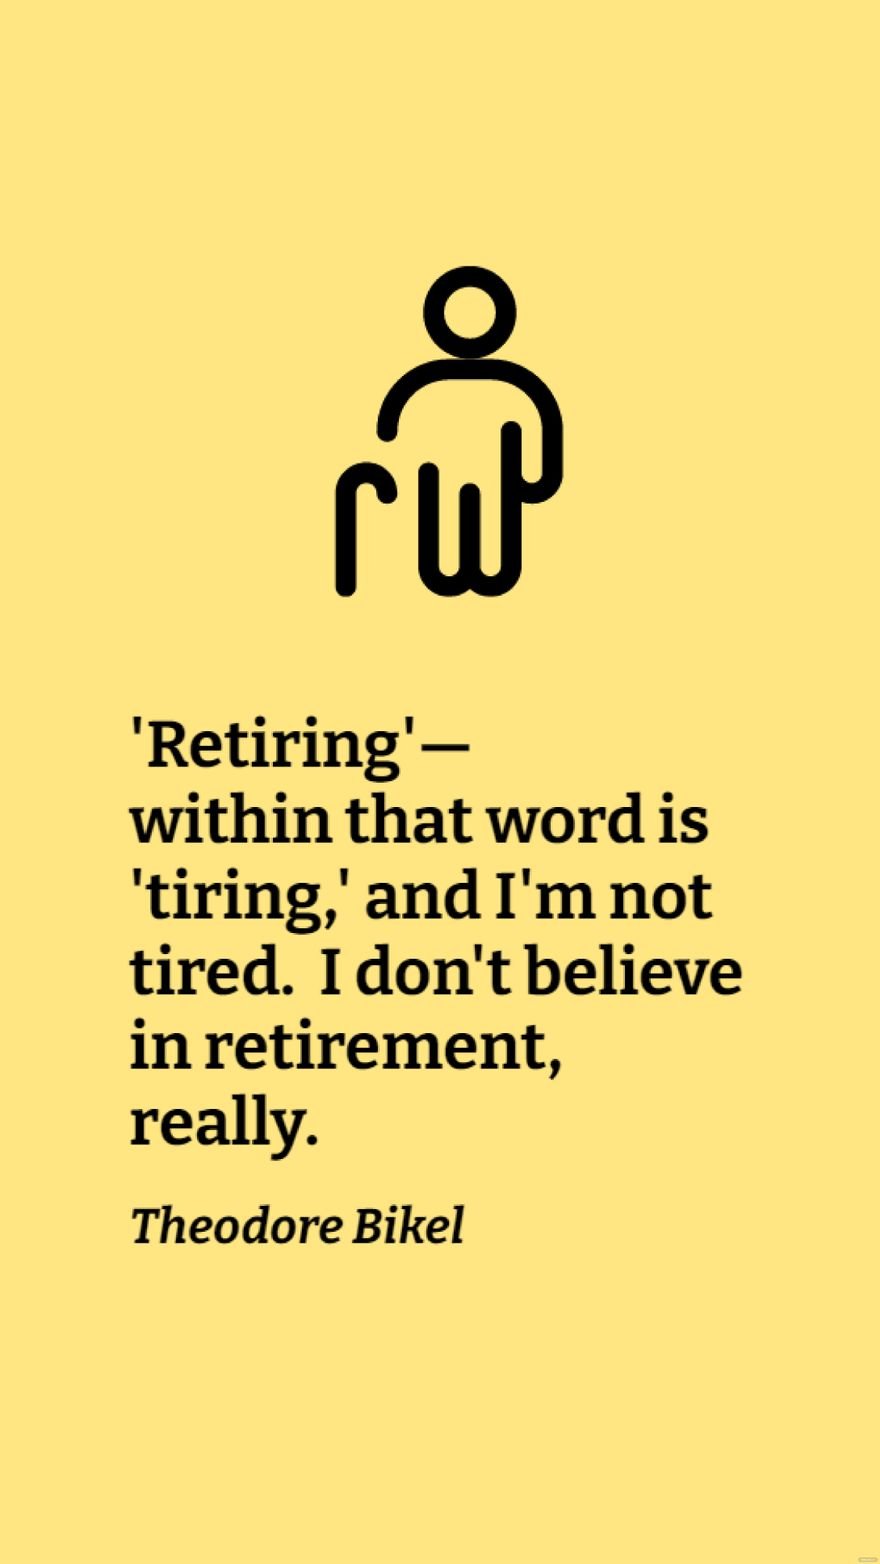 Theodore Bikel - 'Retiring' - within that word is 'tiring,' and I'm not tired. I don't believe in retirement, really.